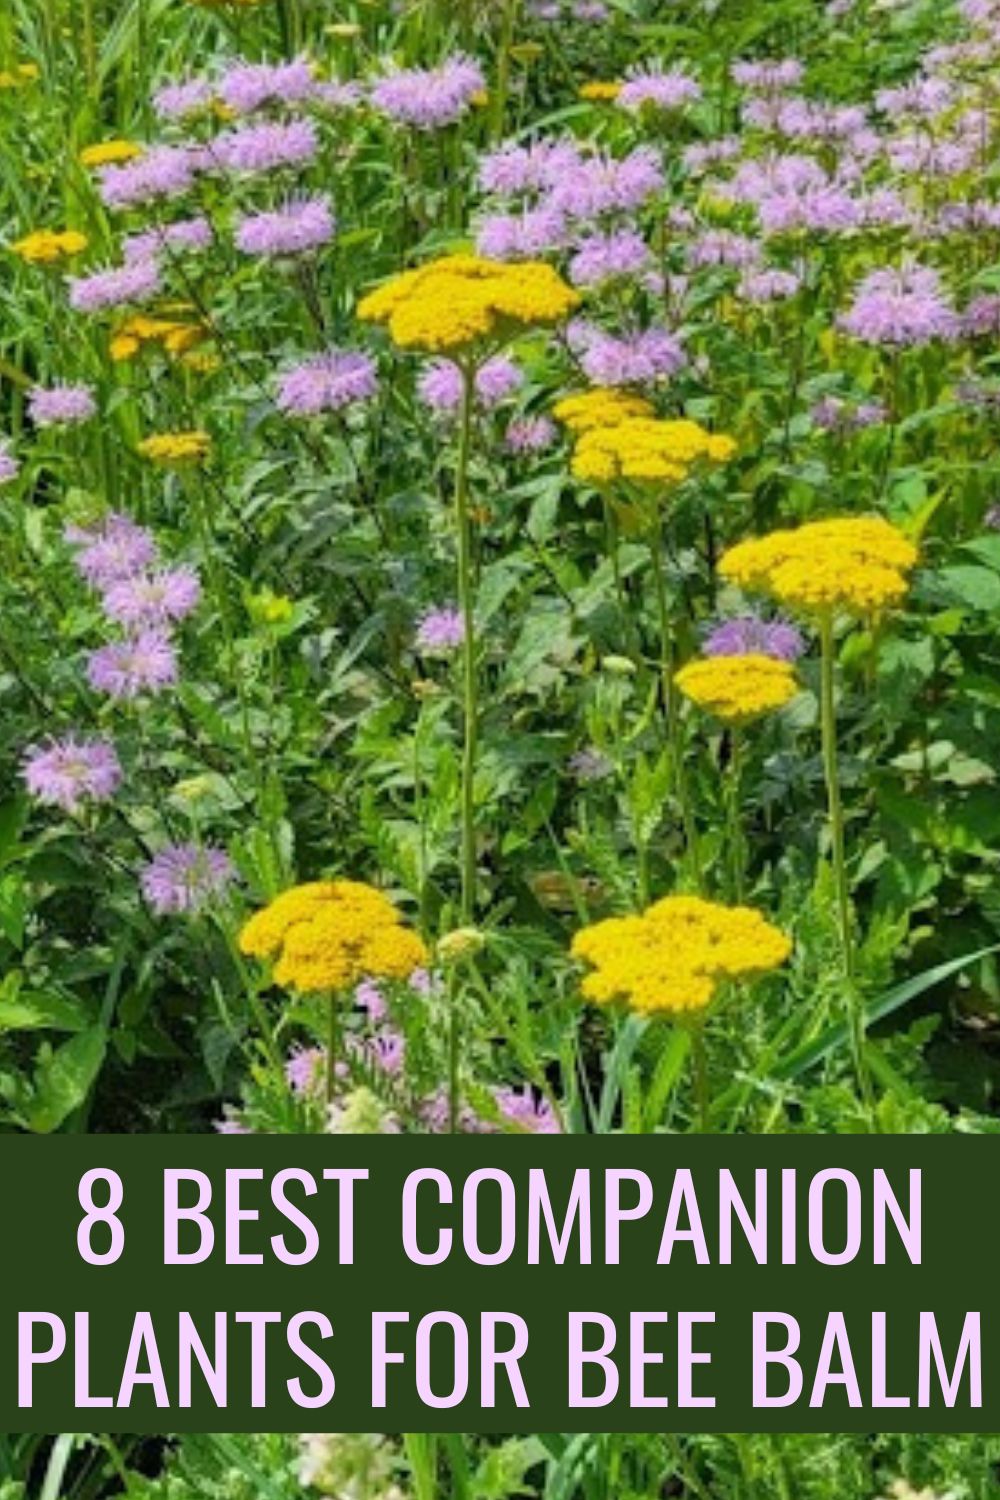 Eight best companion plants for bee balm.